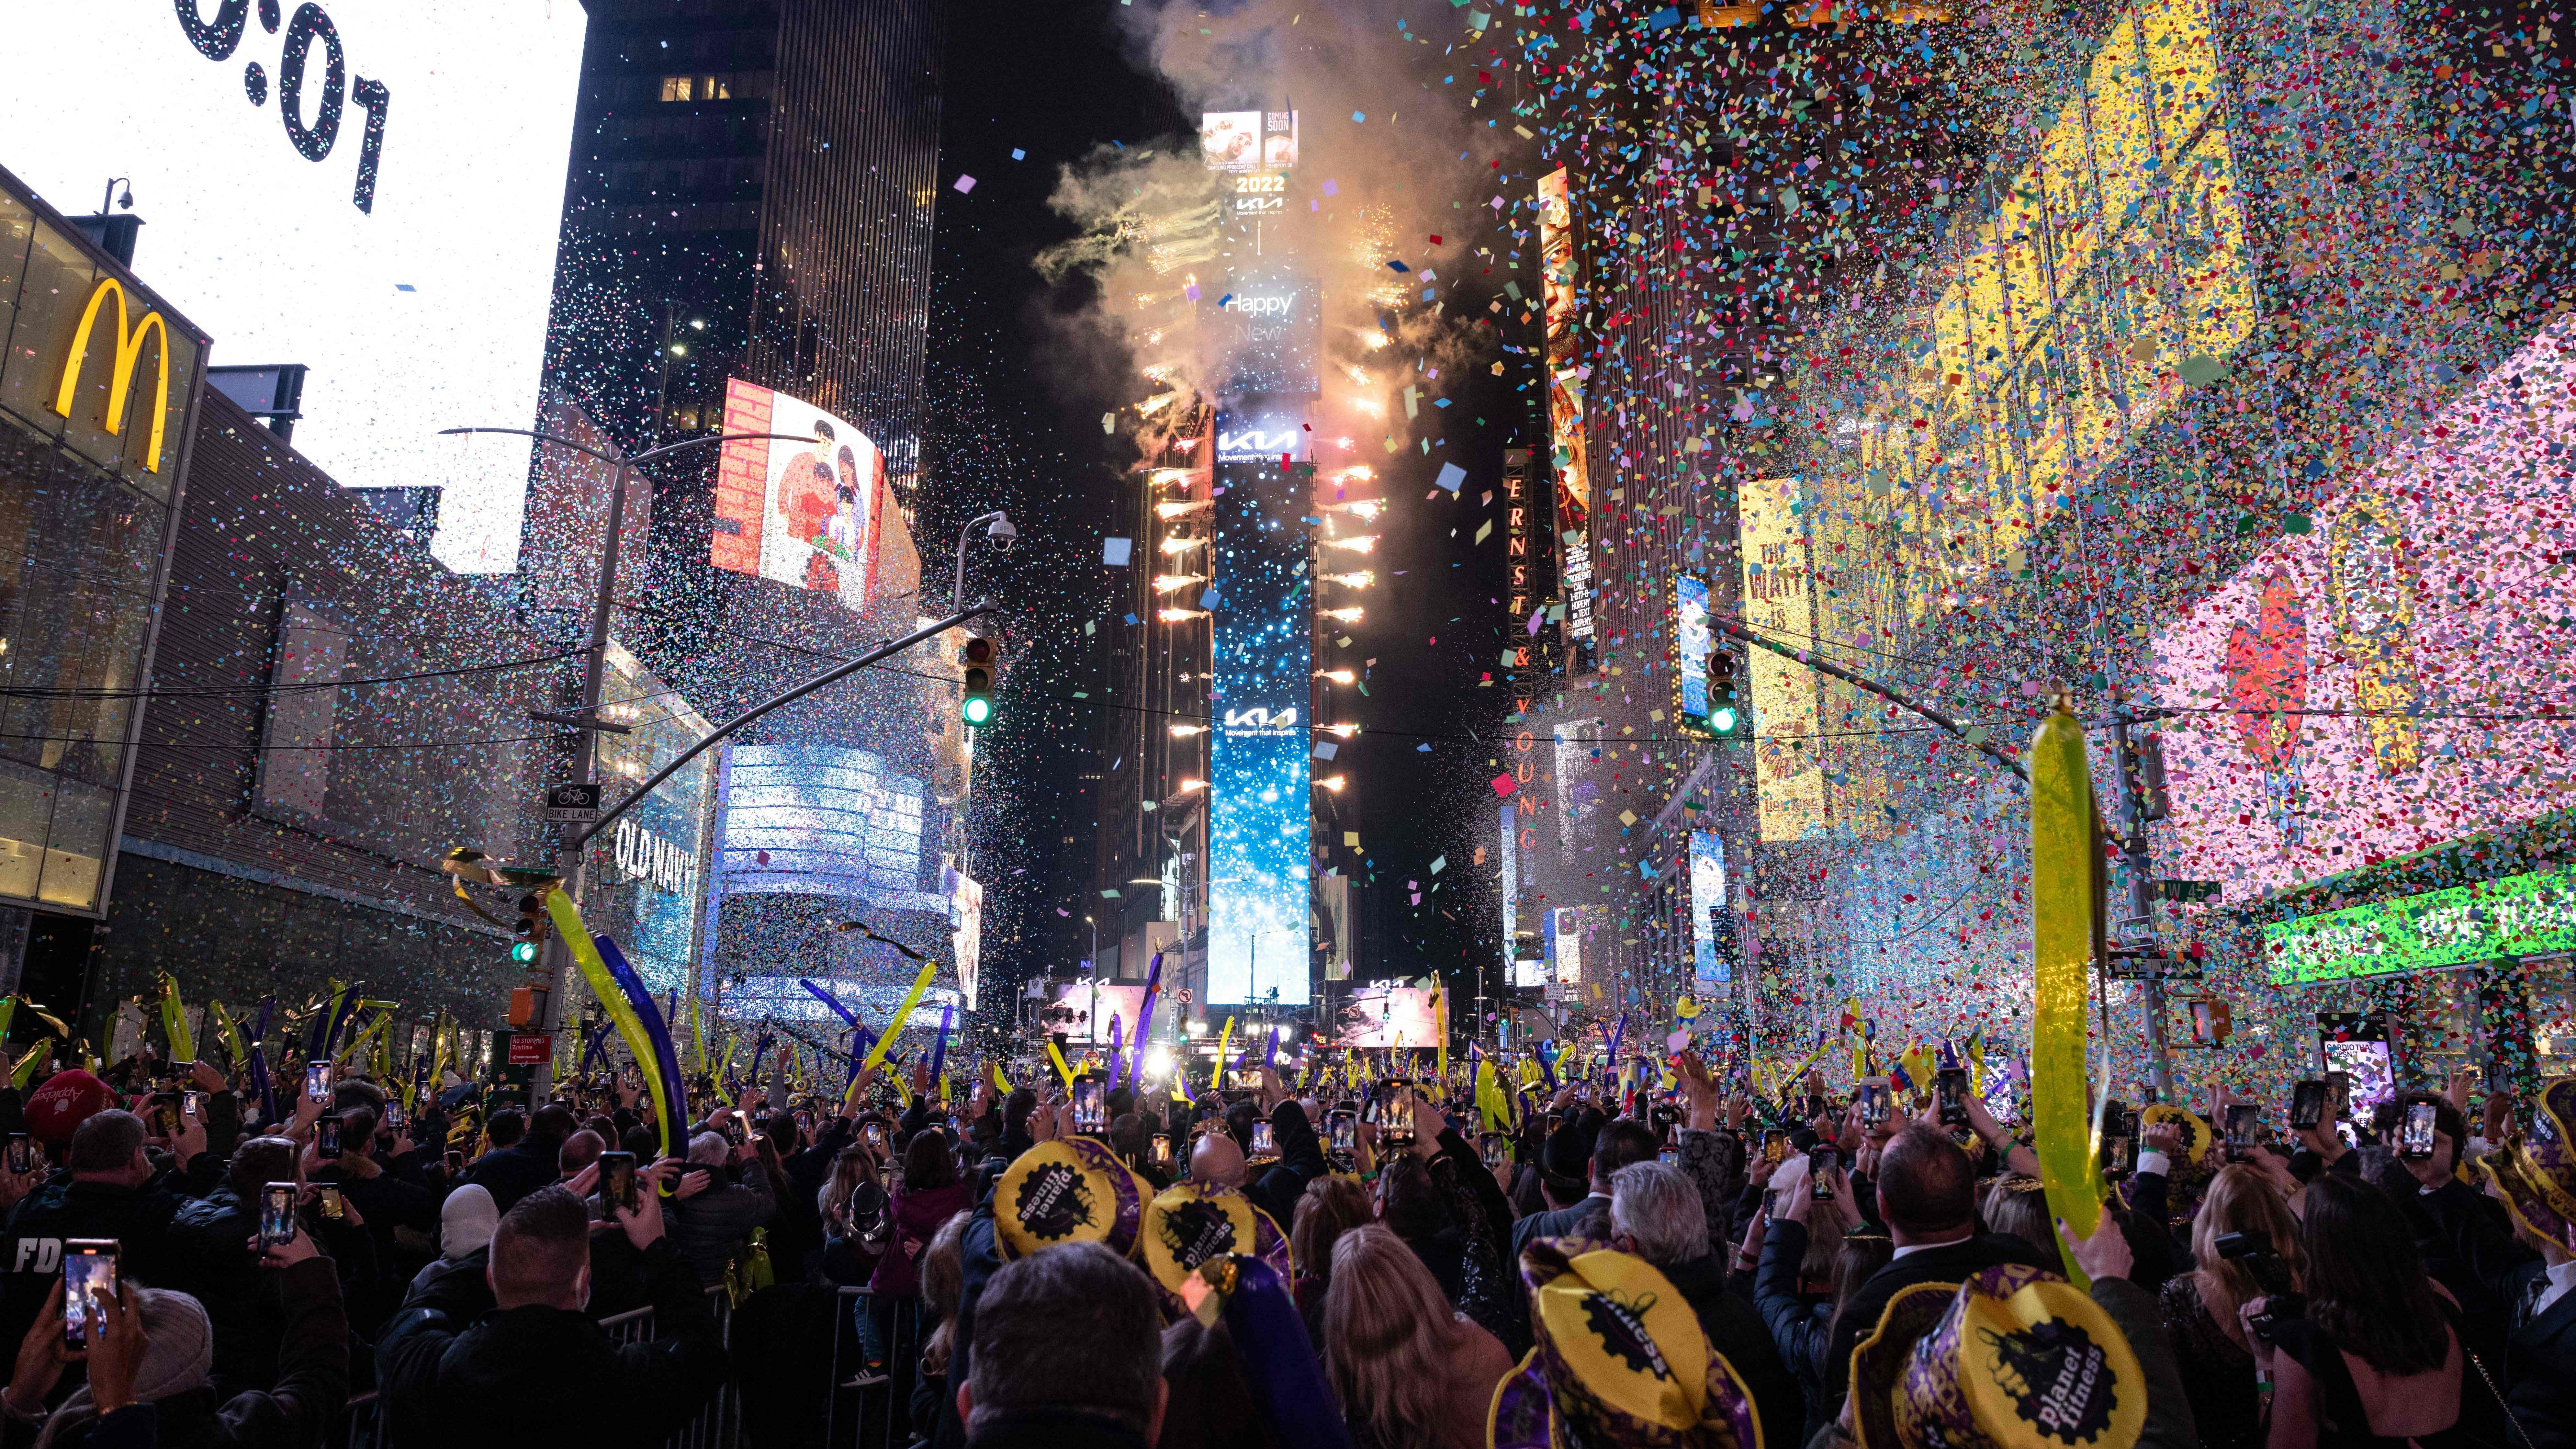 Dick Clark's New Year's Eve Hosts & Performers 2022-2023